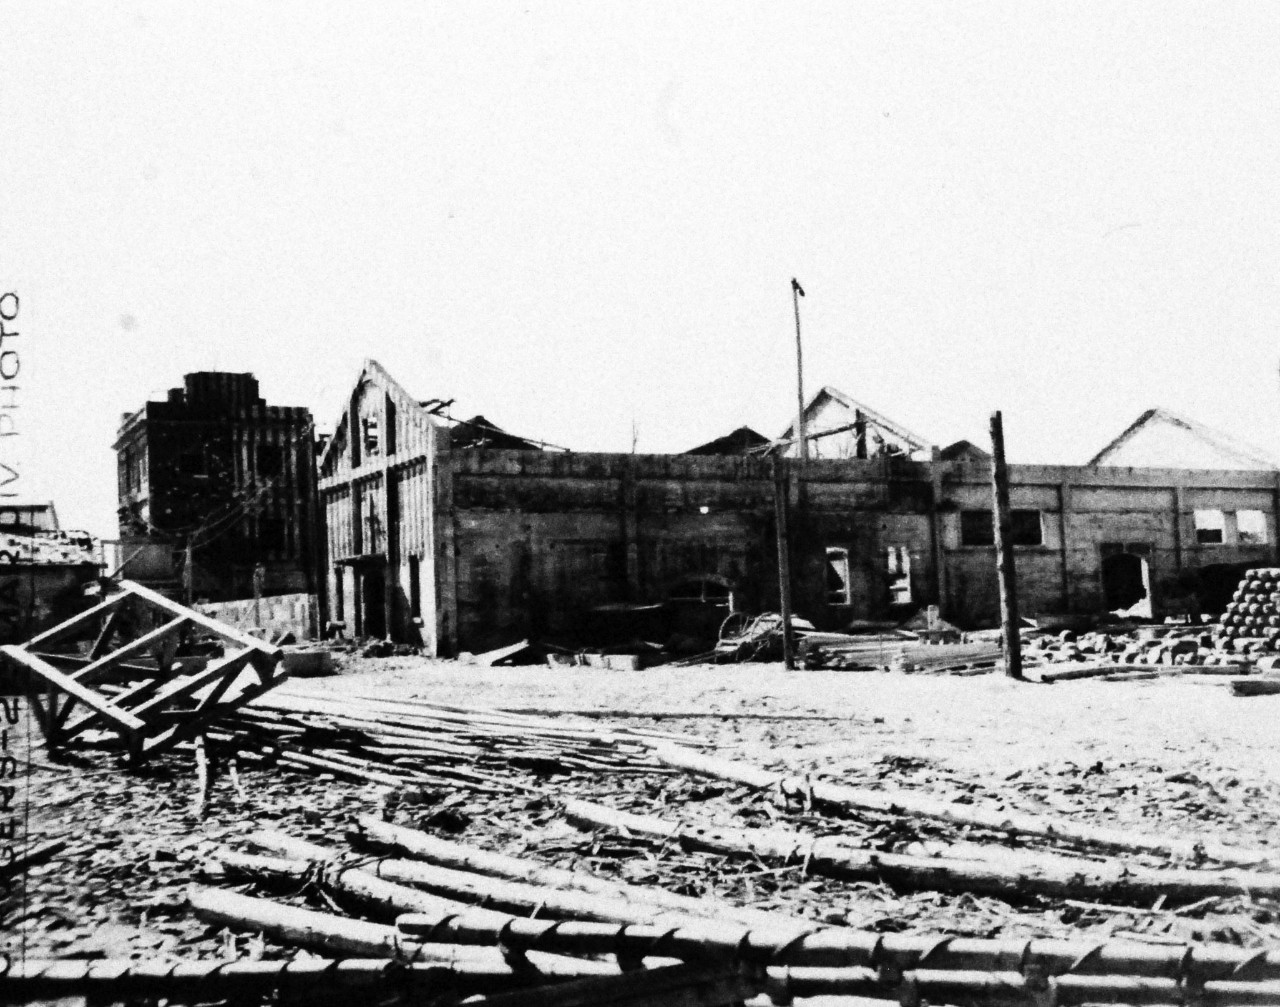 127-GW-1643-147628:     Nagasaki, Japan, 1945.     View of bombed alcohol factory at Kajiki.  Photographed November 4, 1945.        Official U.S. Marine Corps Photograph, now in the collections of the National Archives.  (2016/10/25).